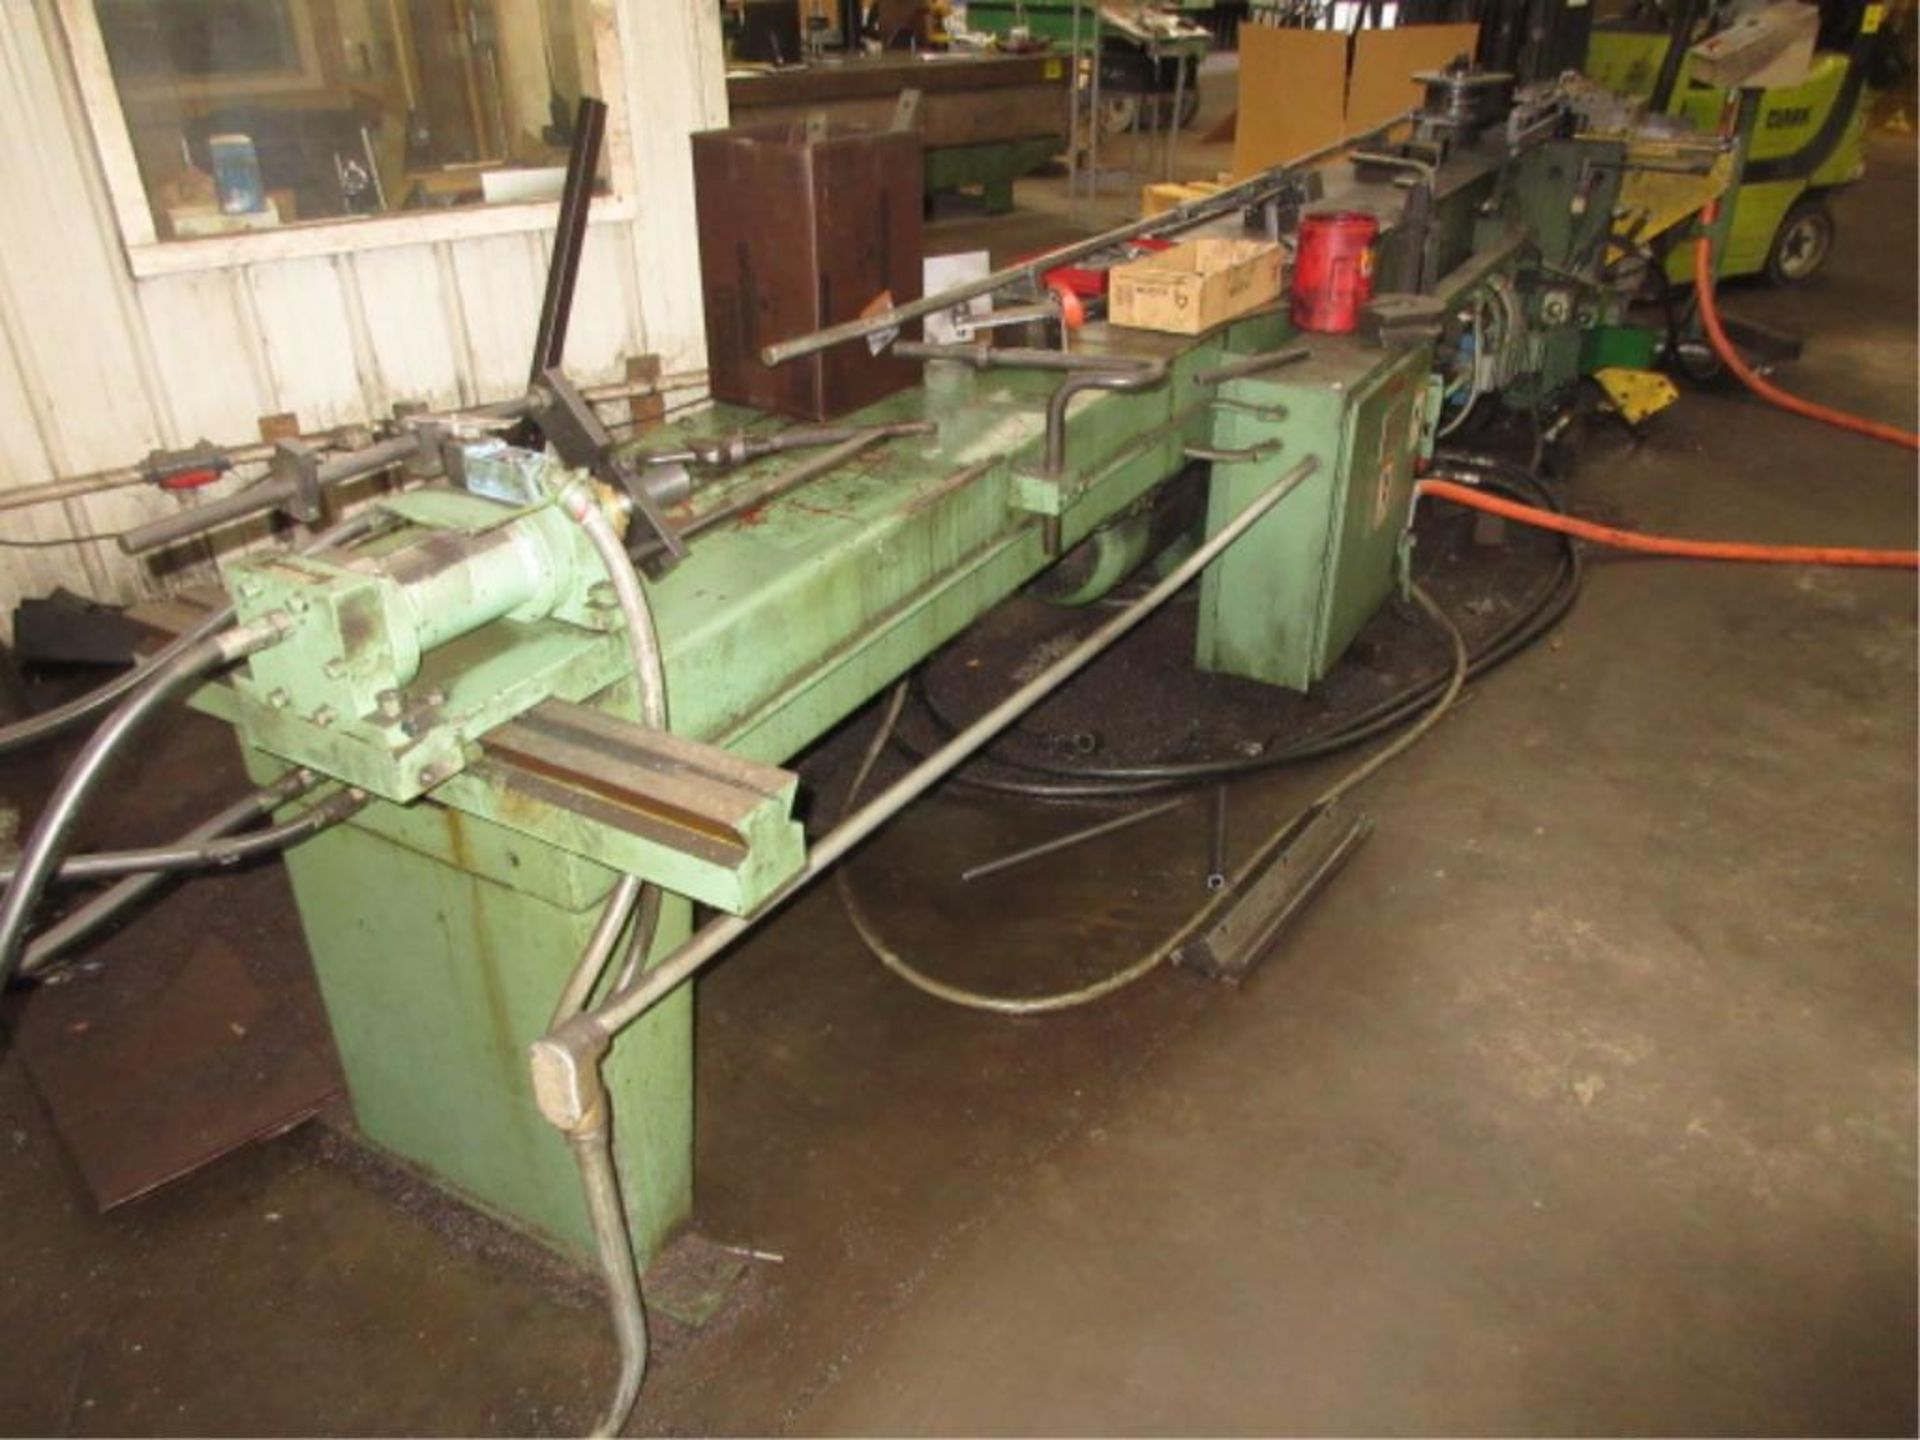 Pines Hydraulic Bender. Pines No. 2 Hydraulic Bender, programmable control with stand, tooling not - Image 3 of 9